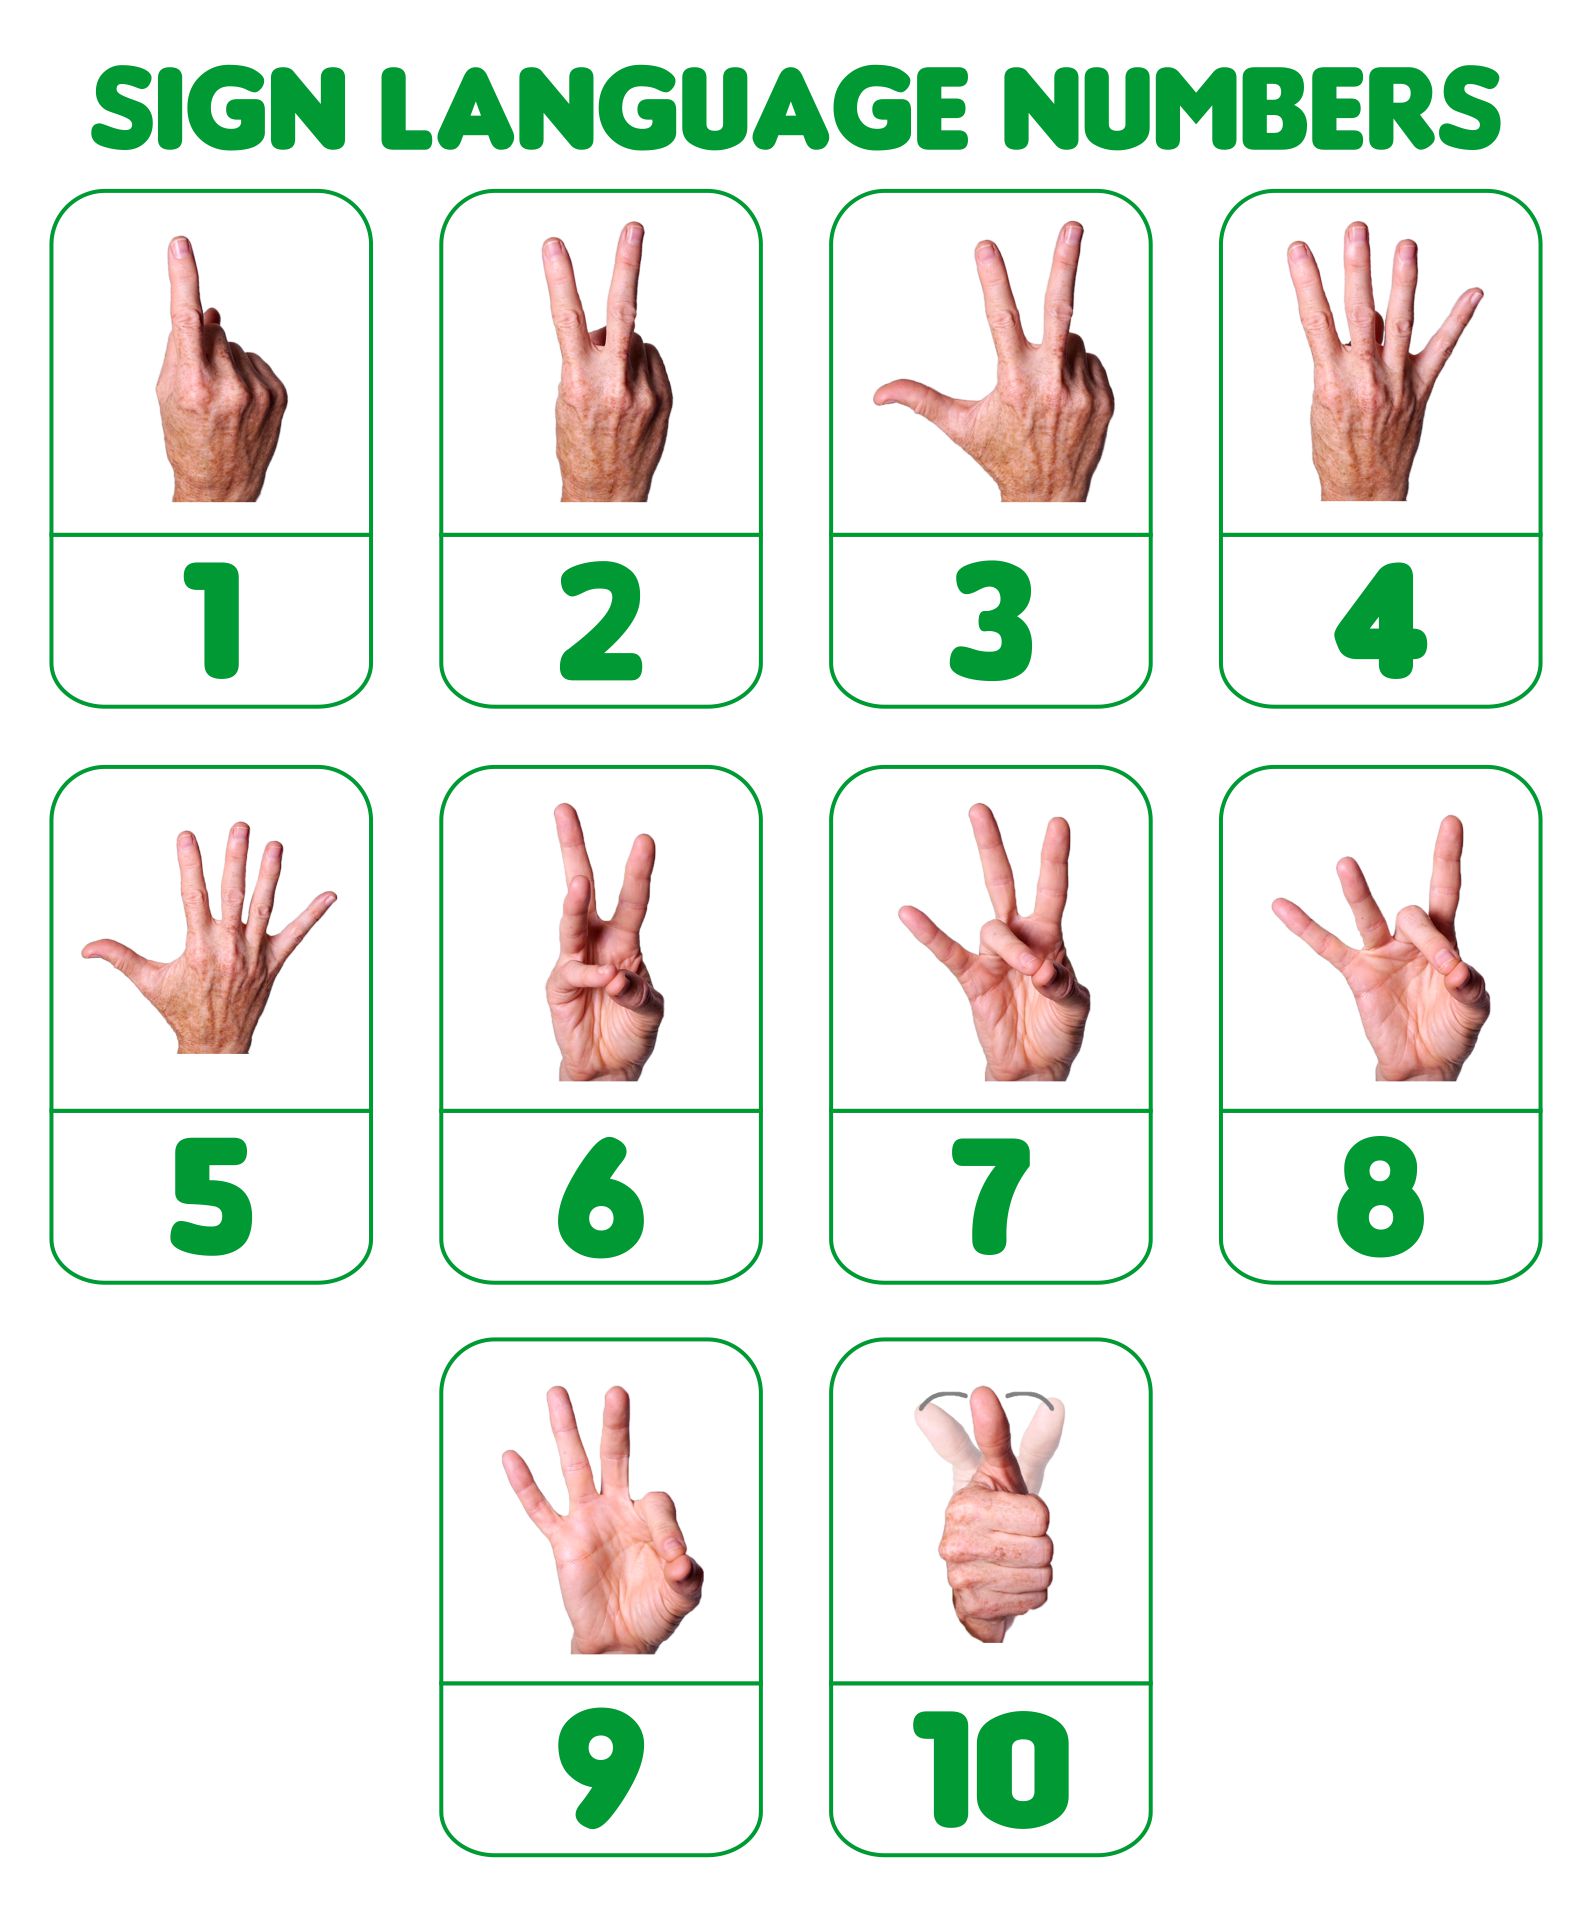 Sign Word List for HANDOUT: NUMBERS 1-10 IN AMERICAN SIGN LANGUAGE